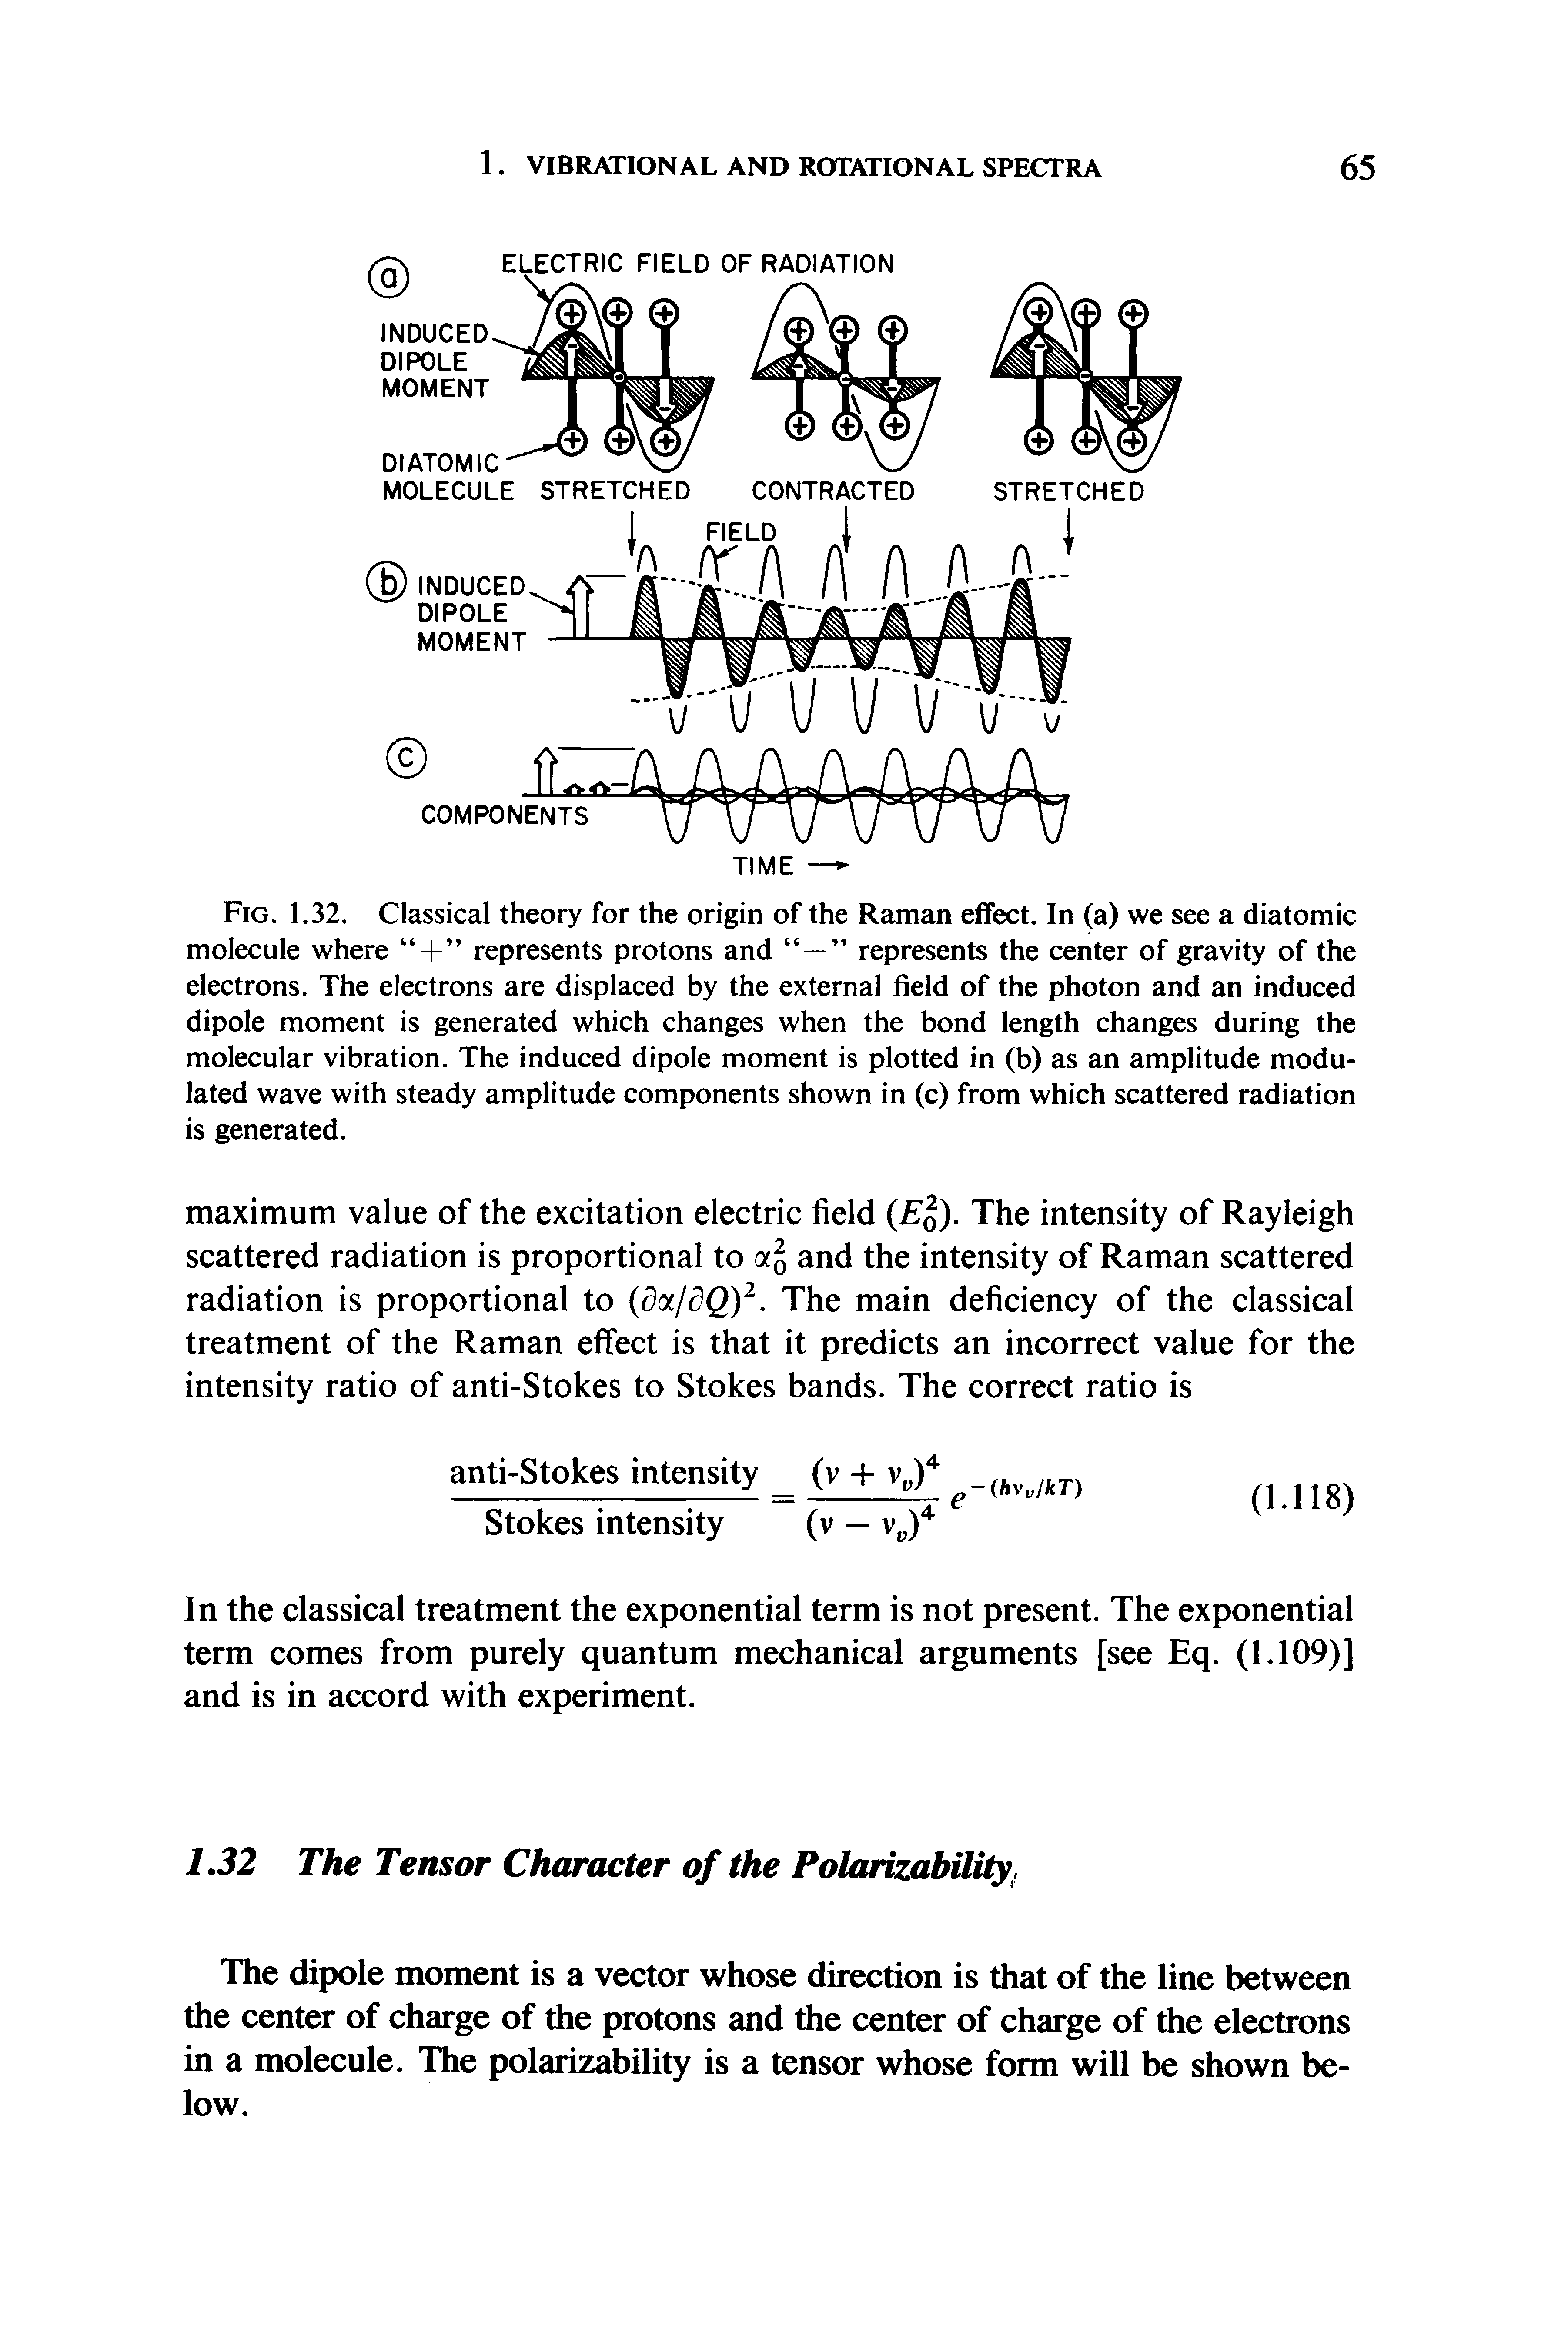 Fig. 1.32. Classical theory for the origin of the Raman effect. In (a) we see a diatomic molecule where represents protons and represents the center of gravity of the electrons. The electrons are displaced by the external field of the photon and an induced dipole moment is generated which changes when the bond length changes during the molecular vibration. The induced dipole moment is plotted in (b) as an amplitude modulated wave with steady amplitude components shown in (c) from which scattered radiation is generated.